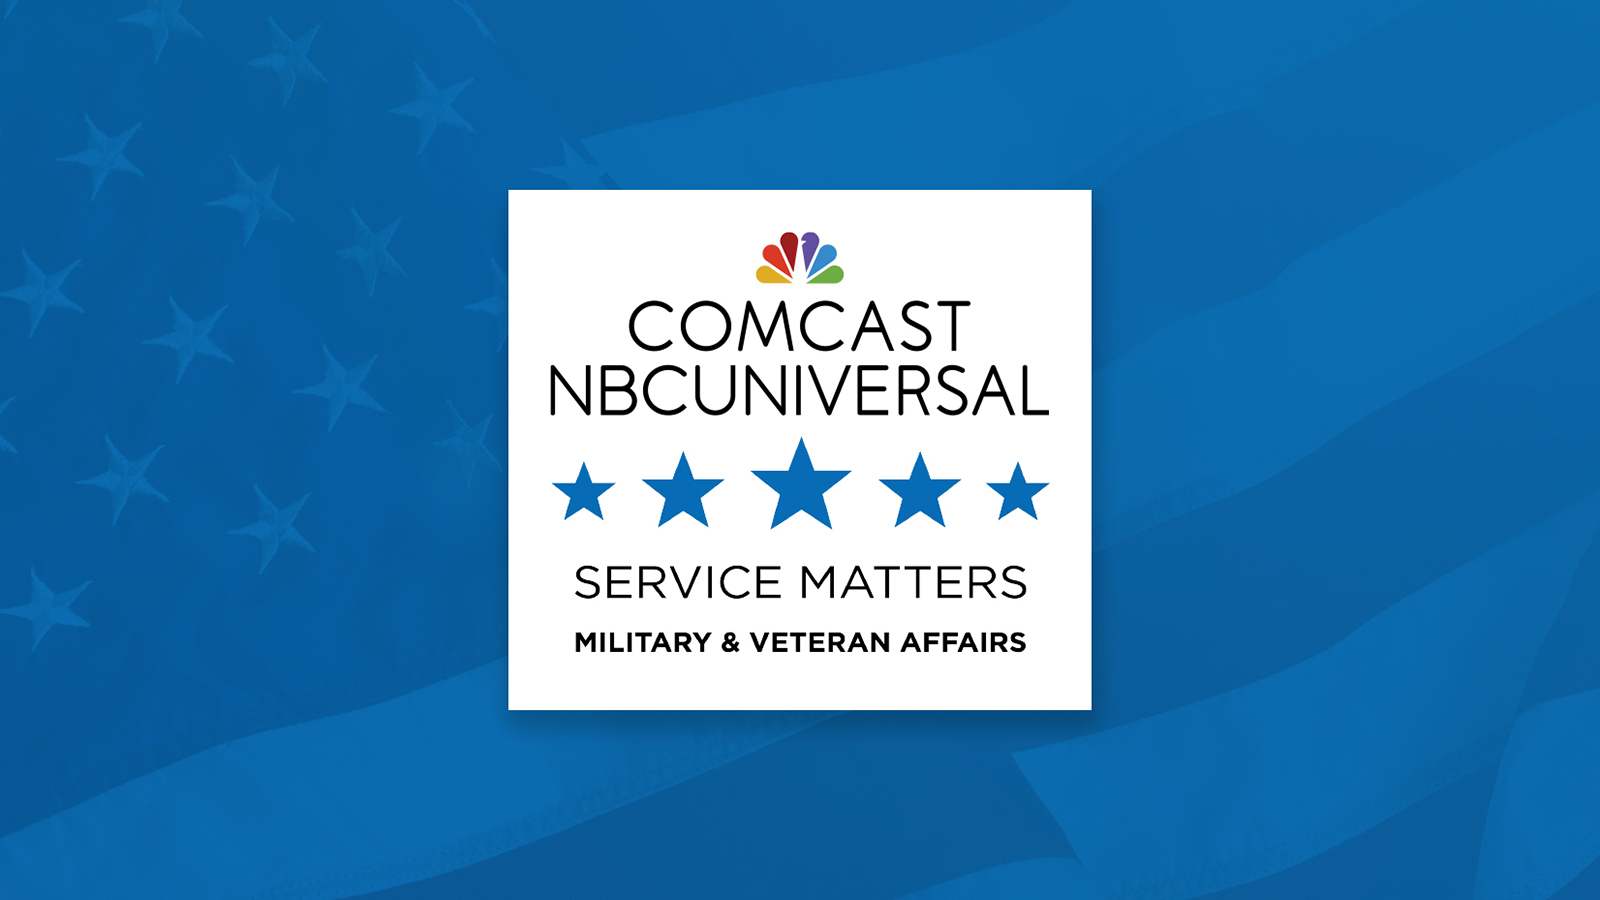 The Comcast NBCUniversal Service Matters logo.